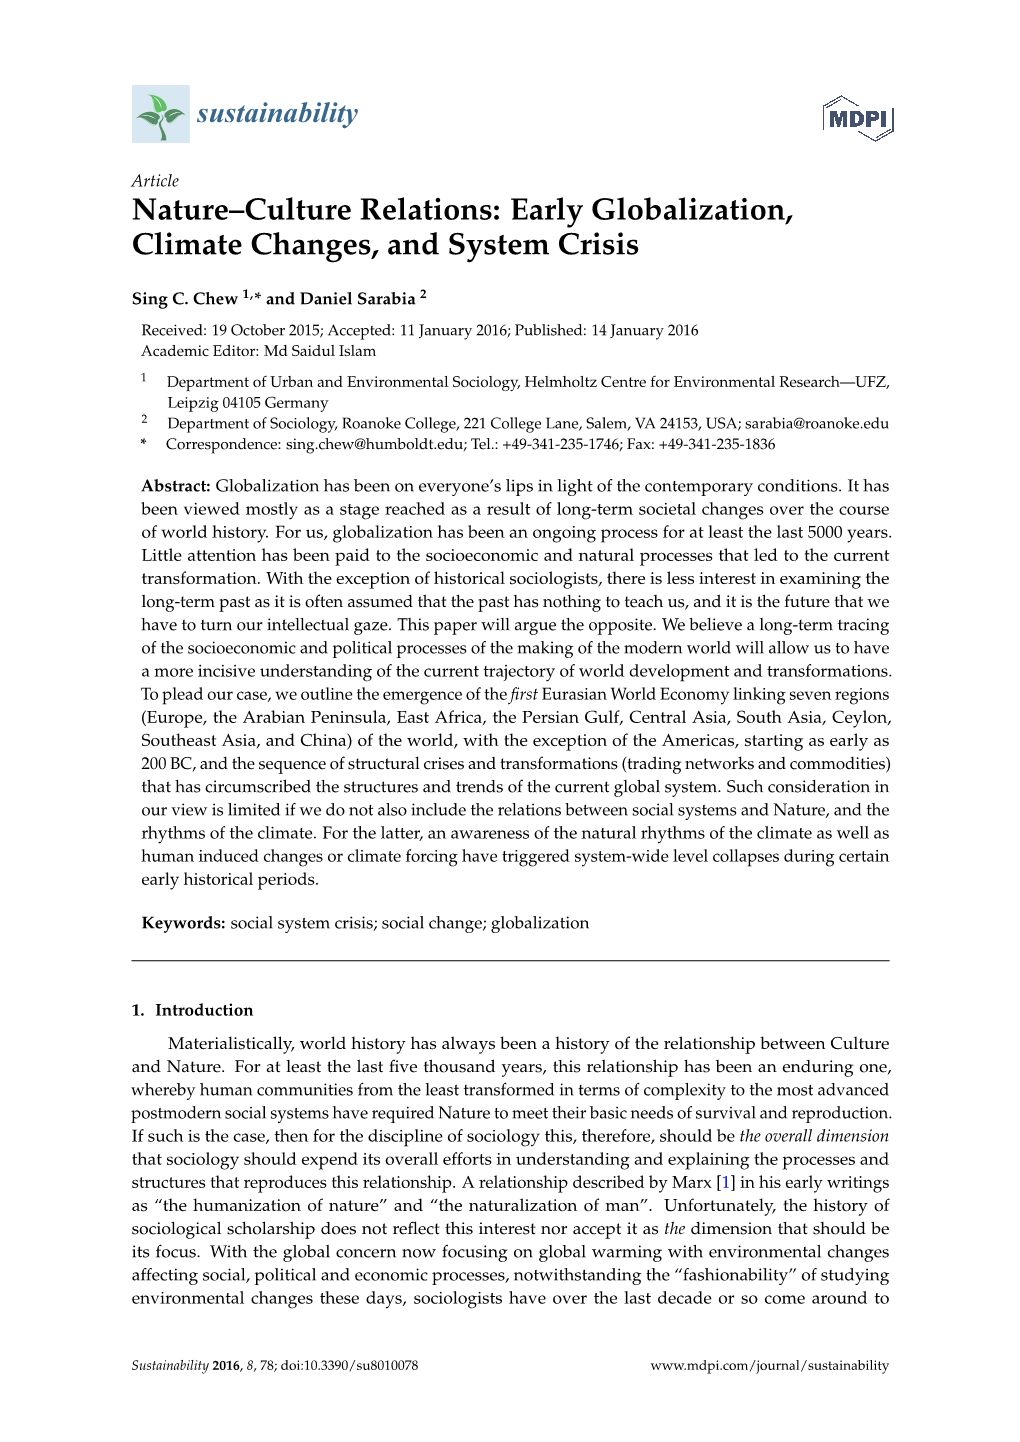 Early Globalization, Climate Changes, and System Crisis